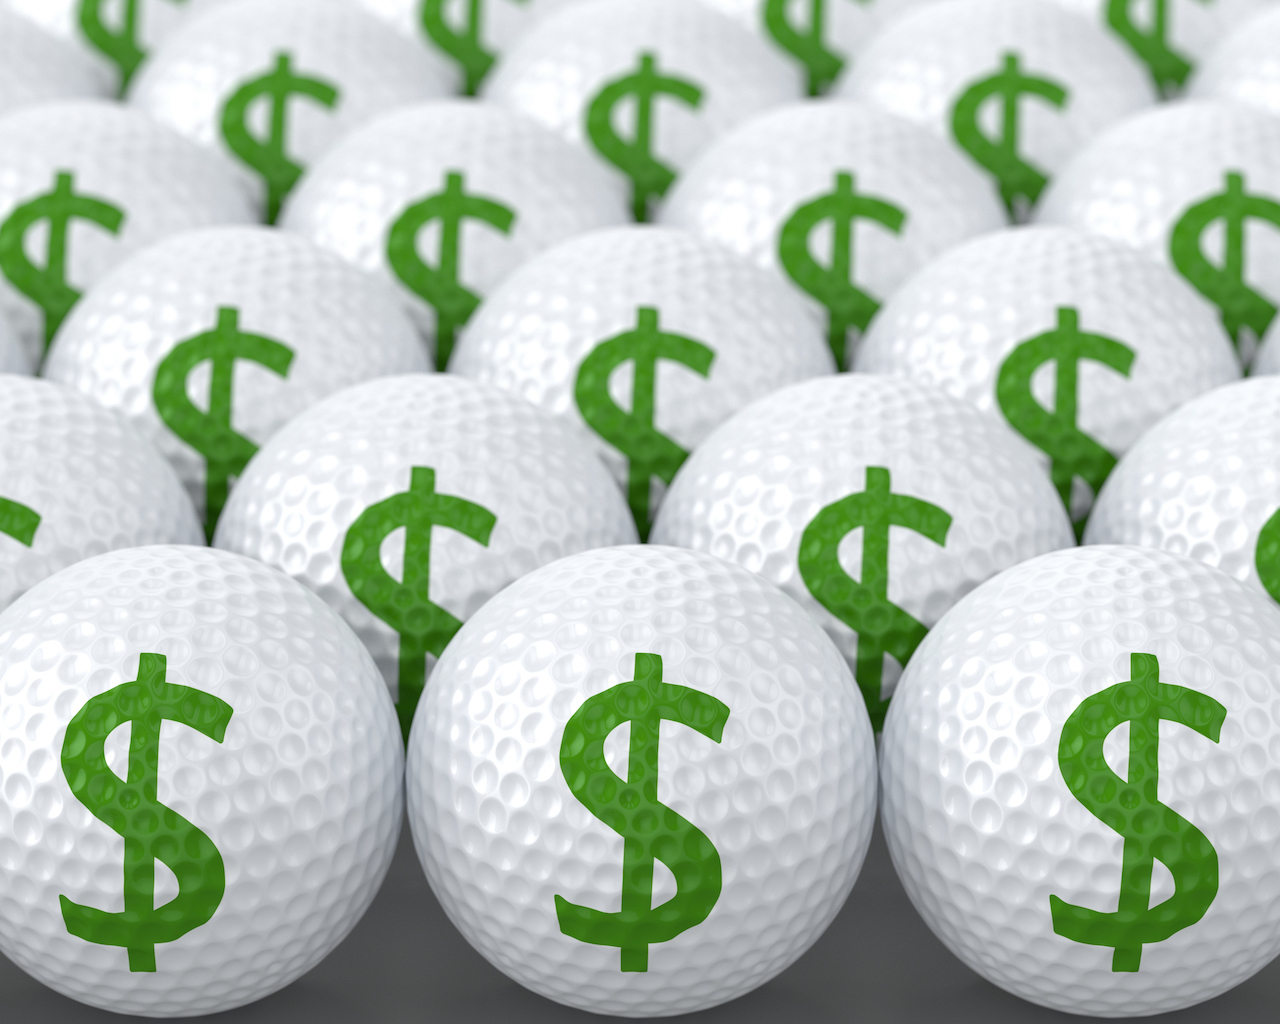 Golf balls with dollar signs